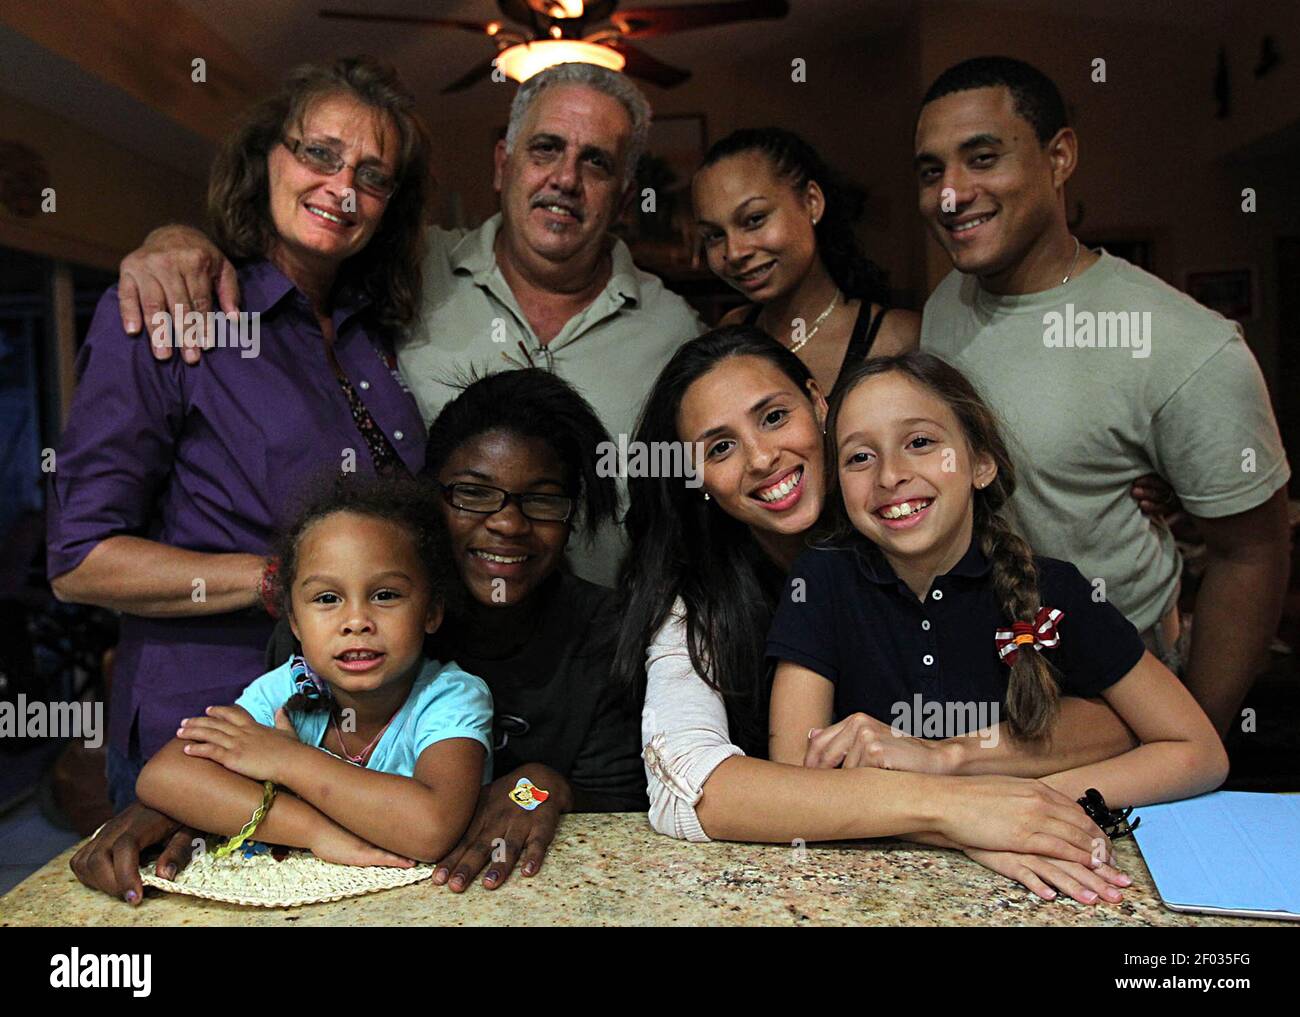 Lisa and Jorge Alvarez, with their family, from left, sitting,  granddaughter Noemi, daughters Natasha and Vanessa, granddaughter Mya,  back, daughter Kathy Remos and her fiancee, Brandon Phillips, at home in  Kendall, Florida